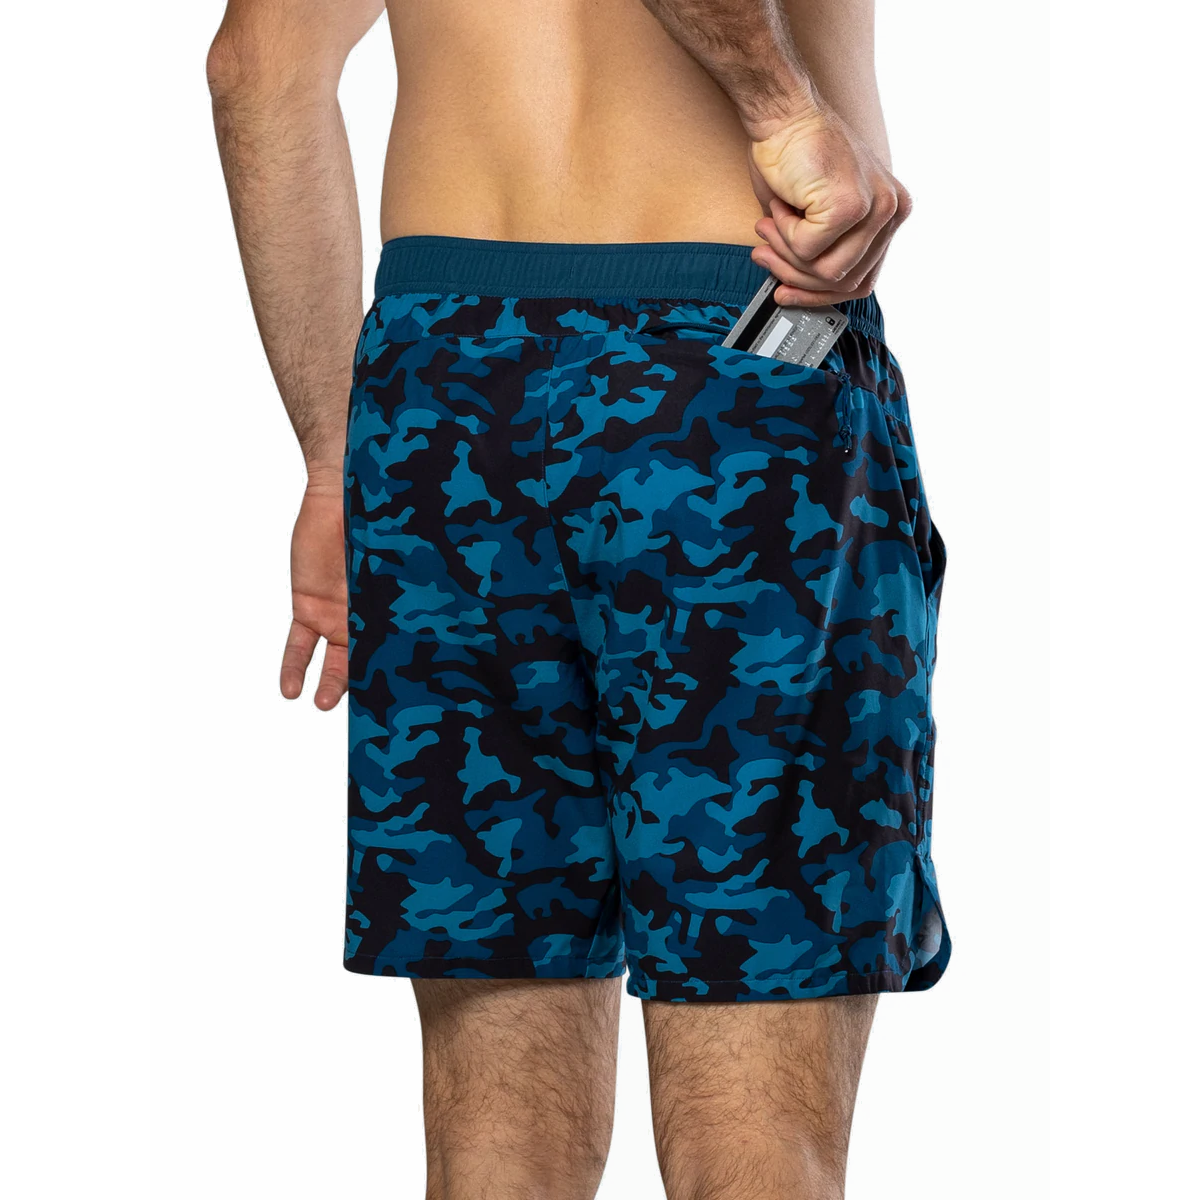 Nathan Printed Essential 7" Short, , large image number null